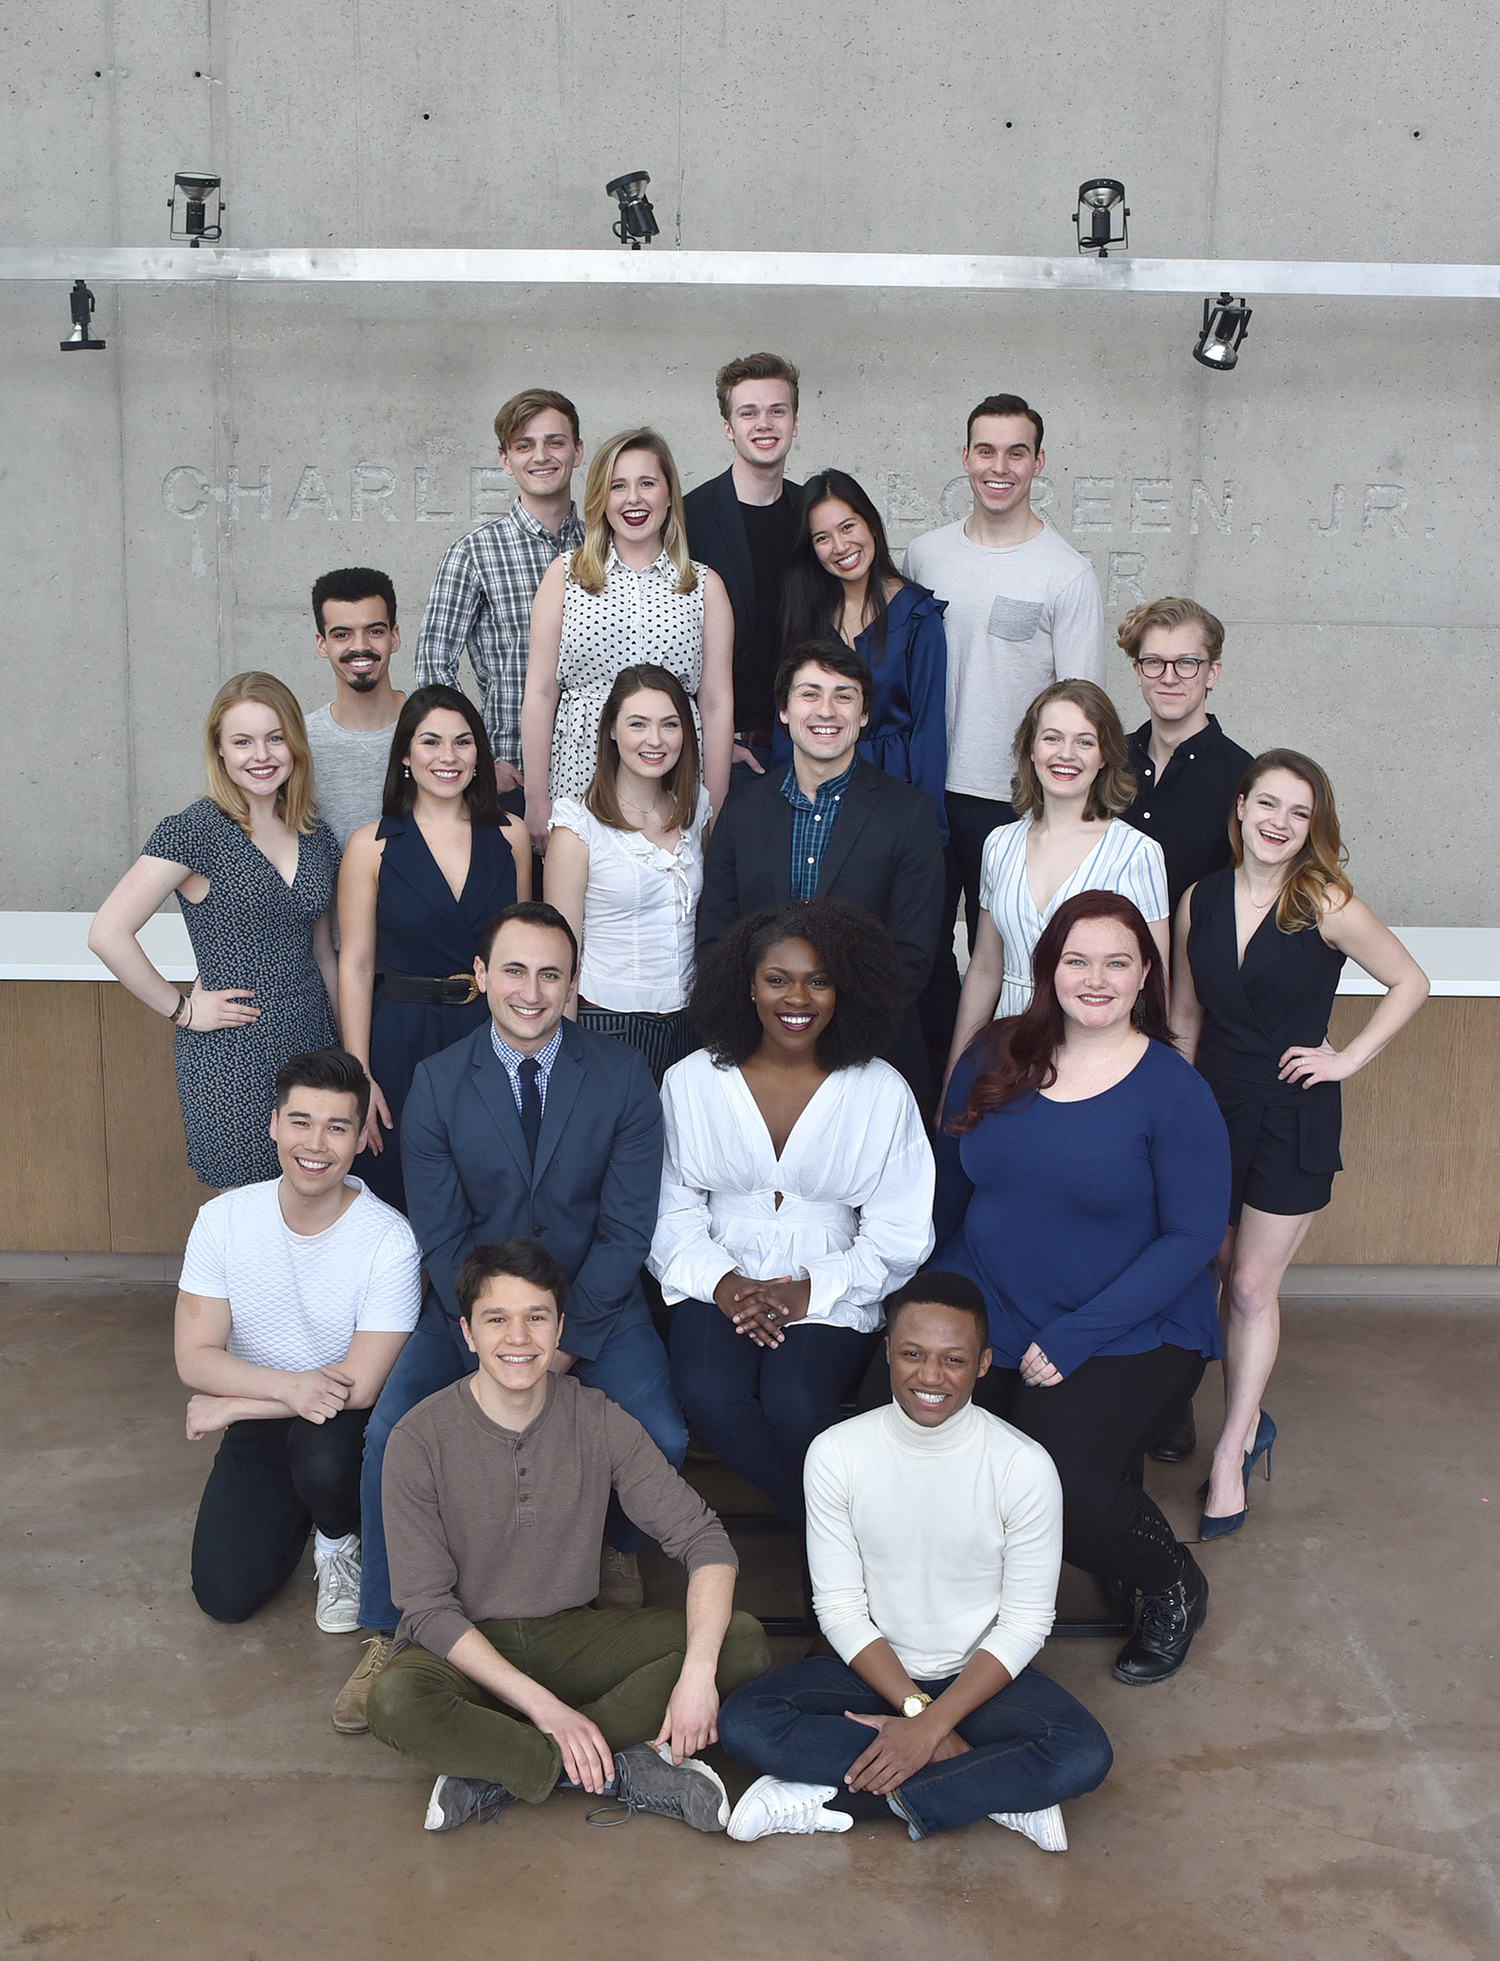 Interview: UNIVERSITY OF MICHIGAN'S Vincent J. Cardinal Takes 2018 UM Musical Theatre Graduating Class to Audition in NYC 